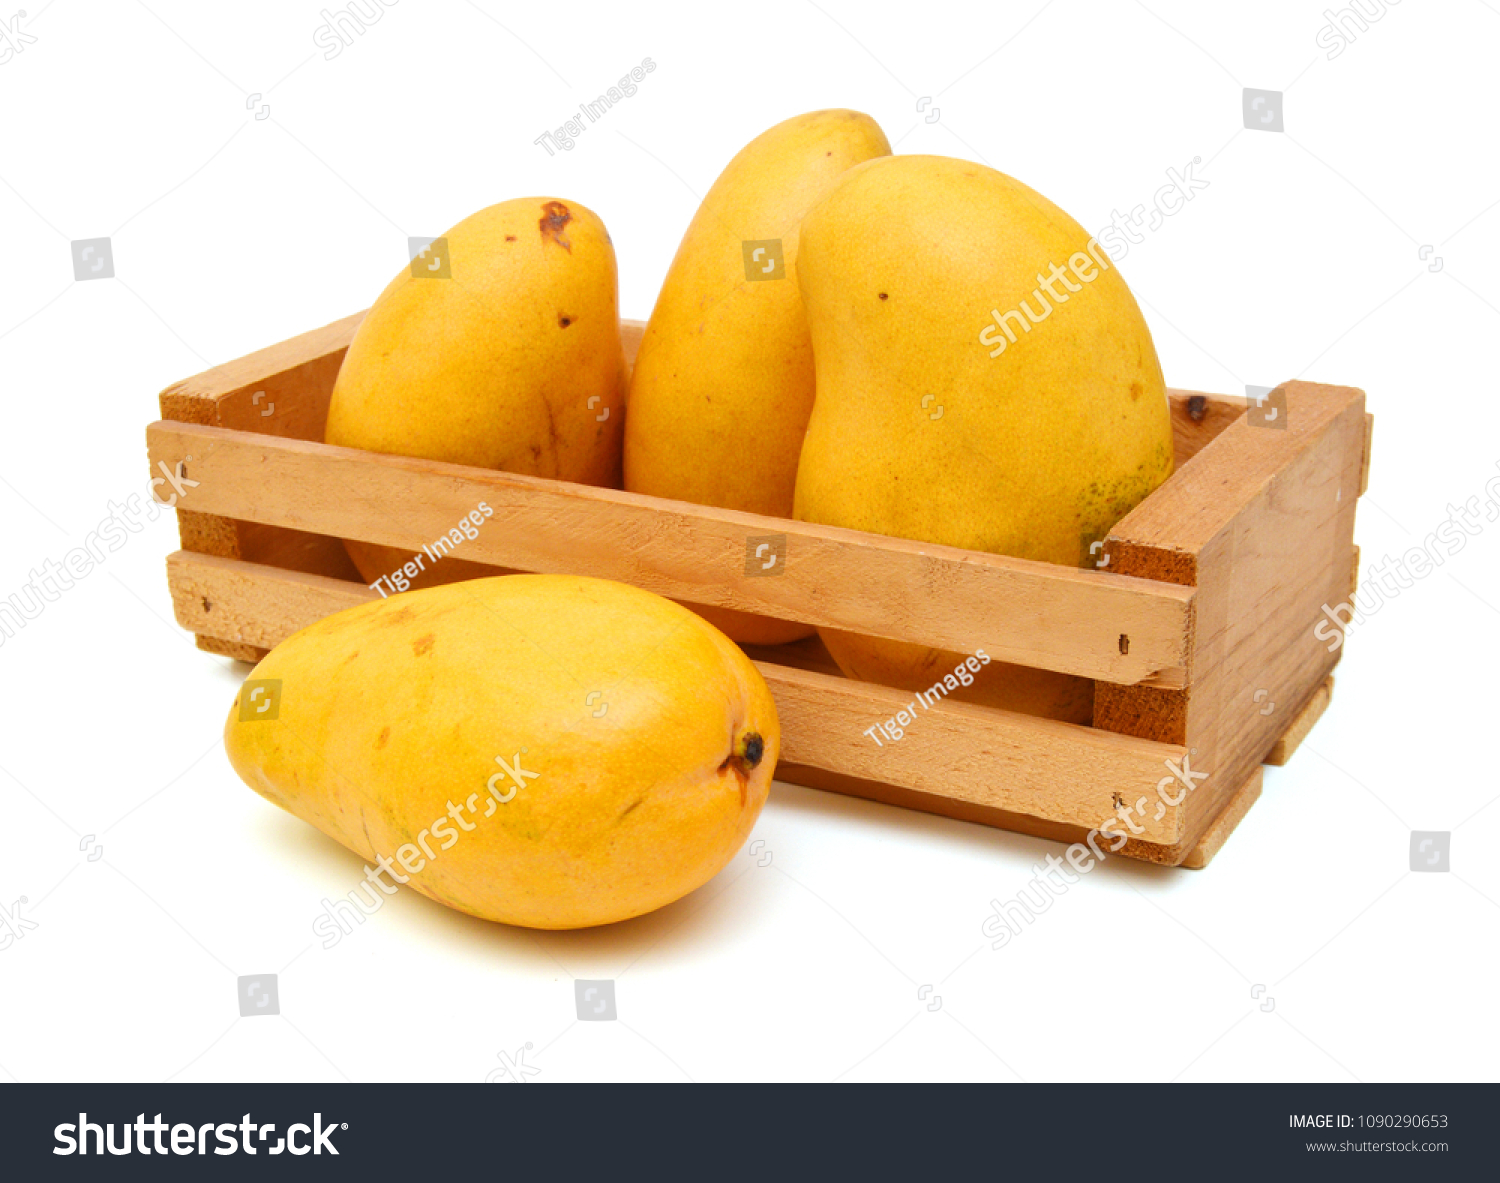 Yellow Mango Isolated Wooden Crate On Food And Drink Stock Image 1090290653